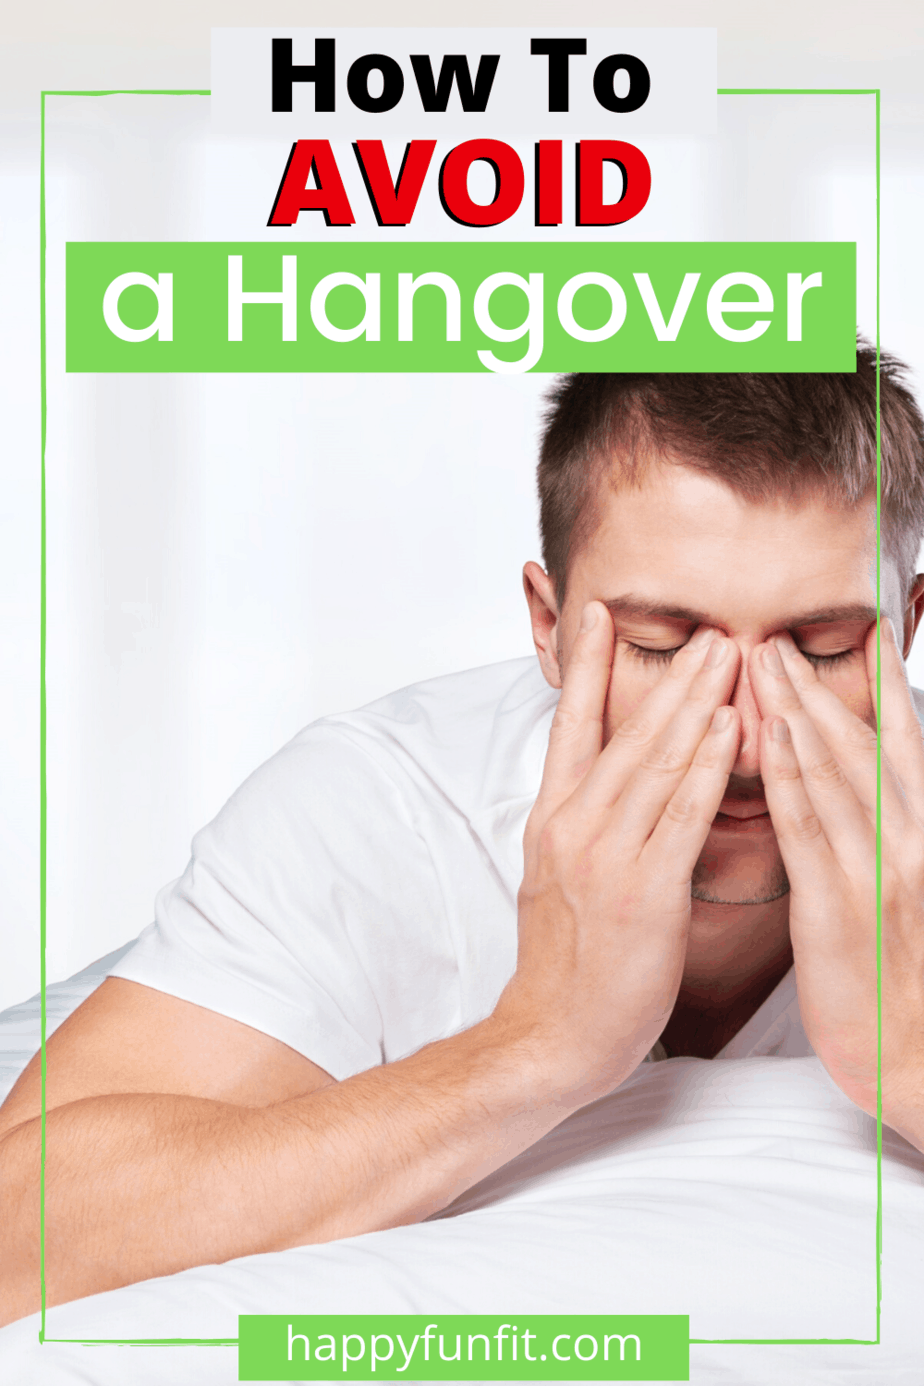 How to avoid a hangover